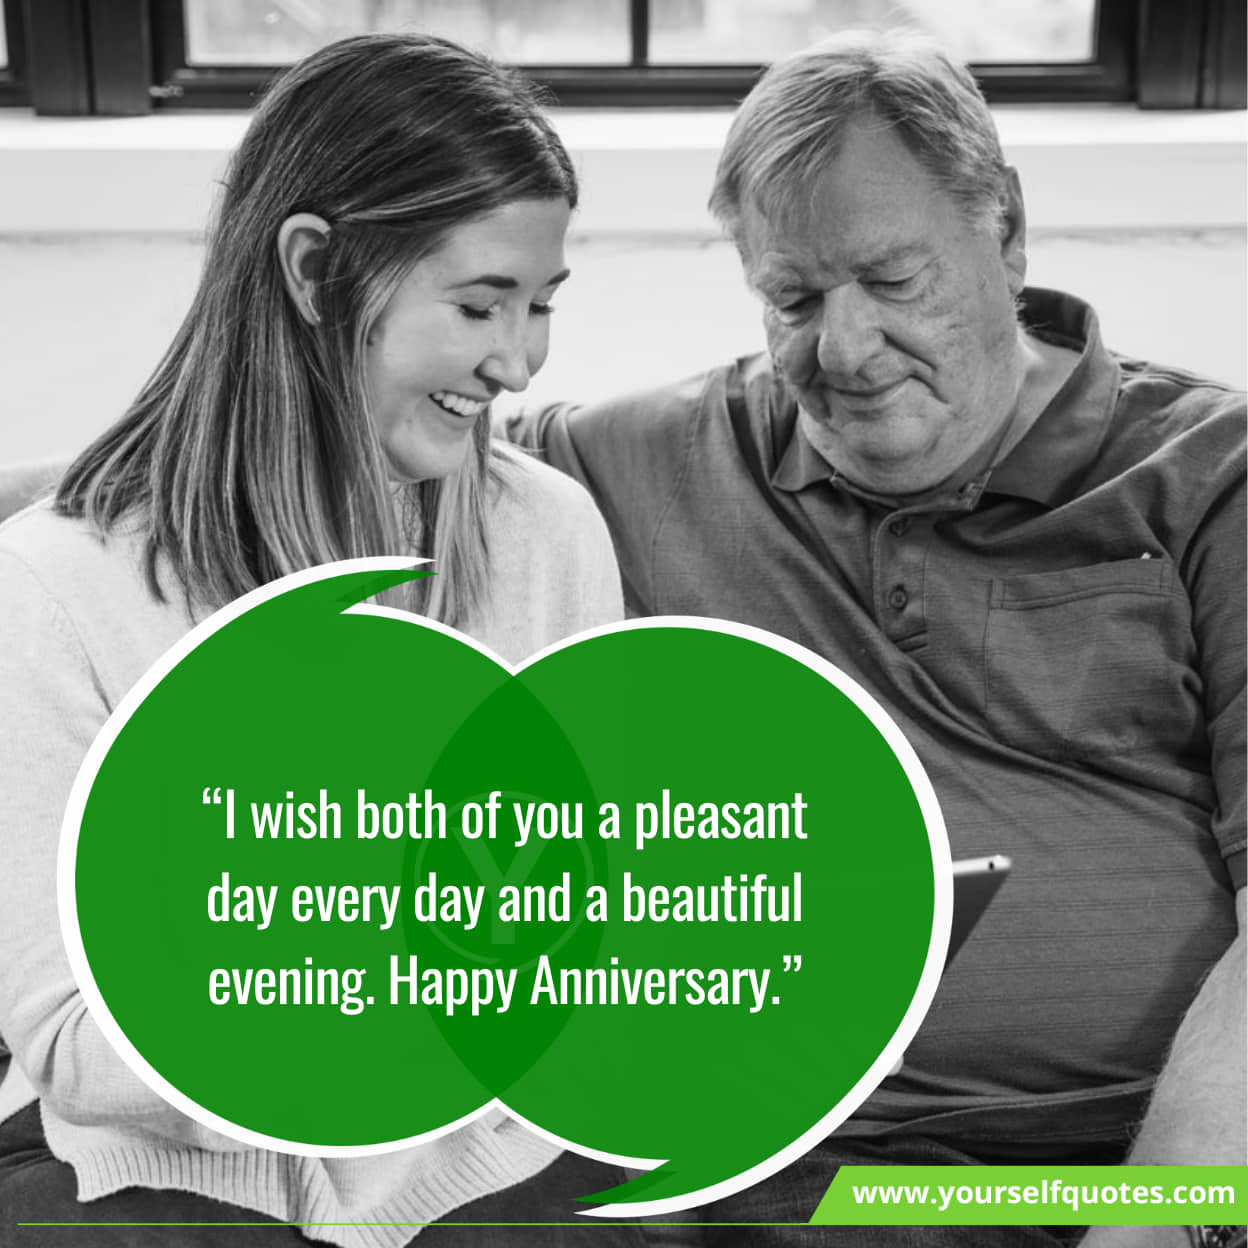 Happy Anniversary Wishes for the Most Amazing Parents